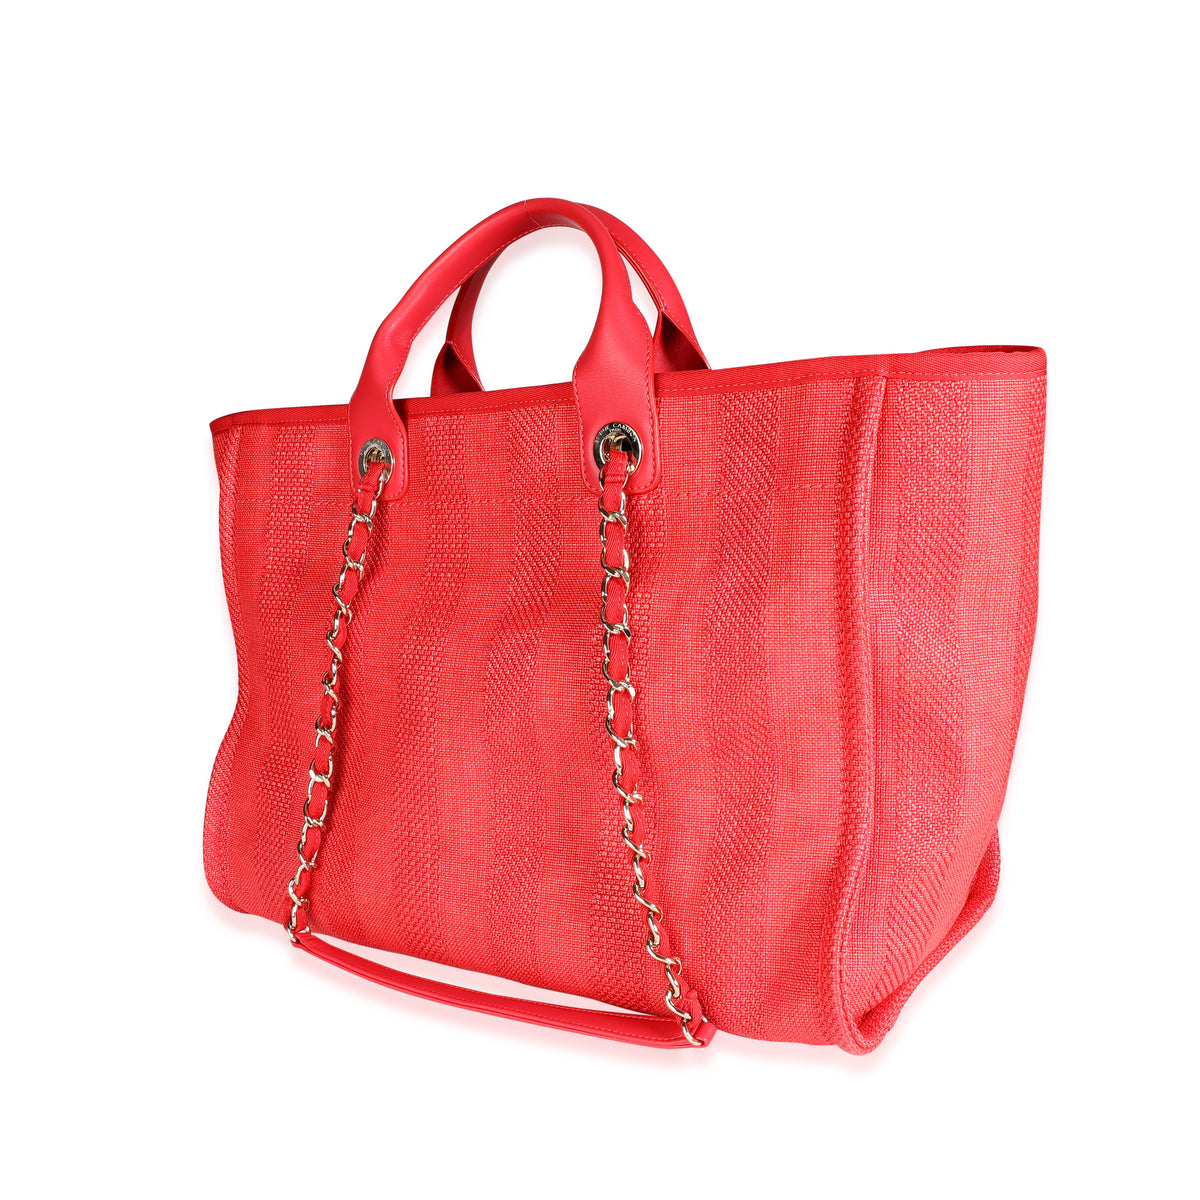 Chanel Red Canvas & Leather Large Deauville Tote